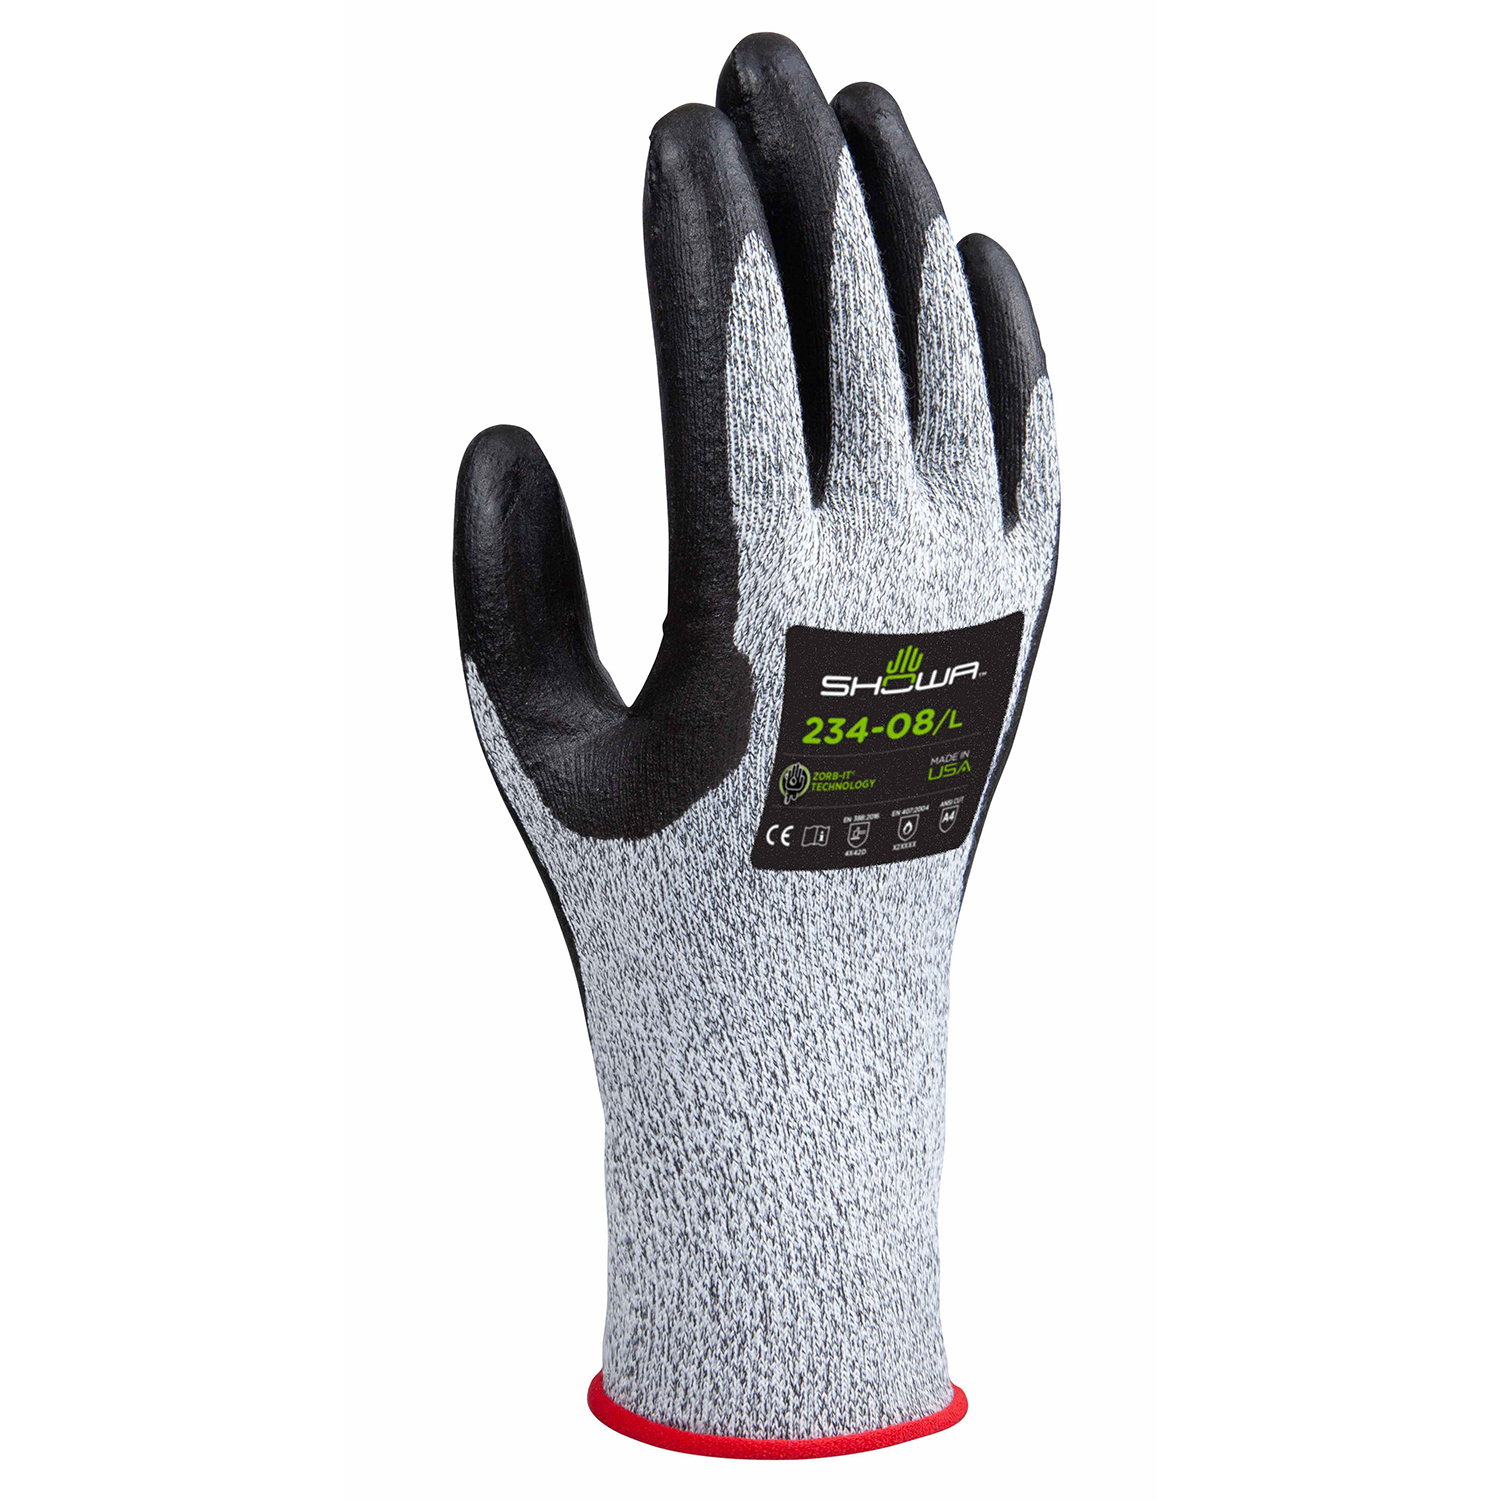 Foam nitrile palm, 15 gauge seamless spandex/engineered cut resistant liner reinforced w/HPPE,  black & white w/gray, ANSI CUT LEVEL A4/large - Cut Resistant